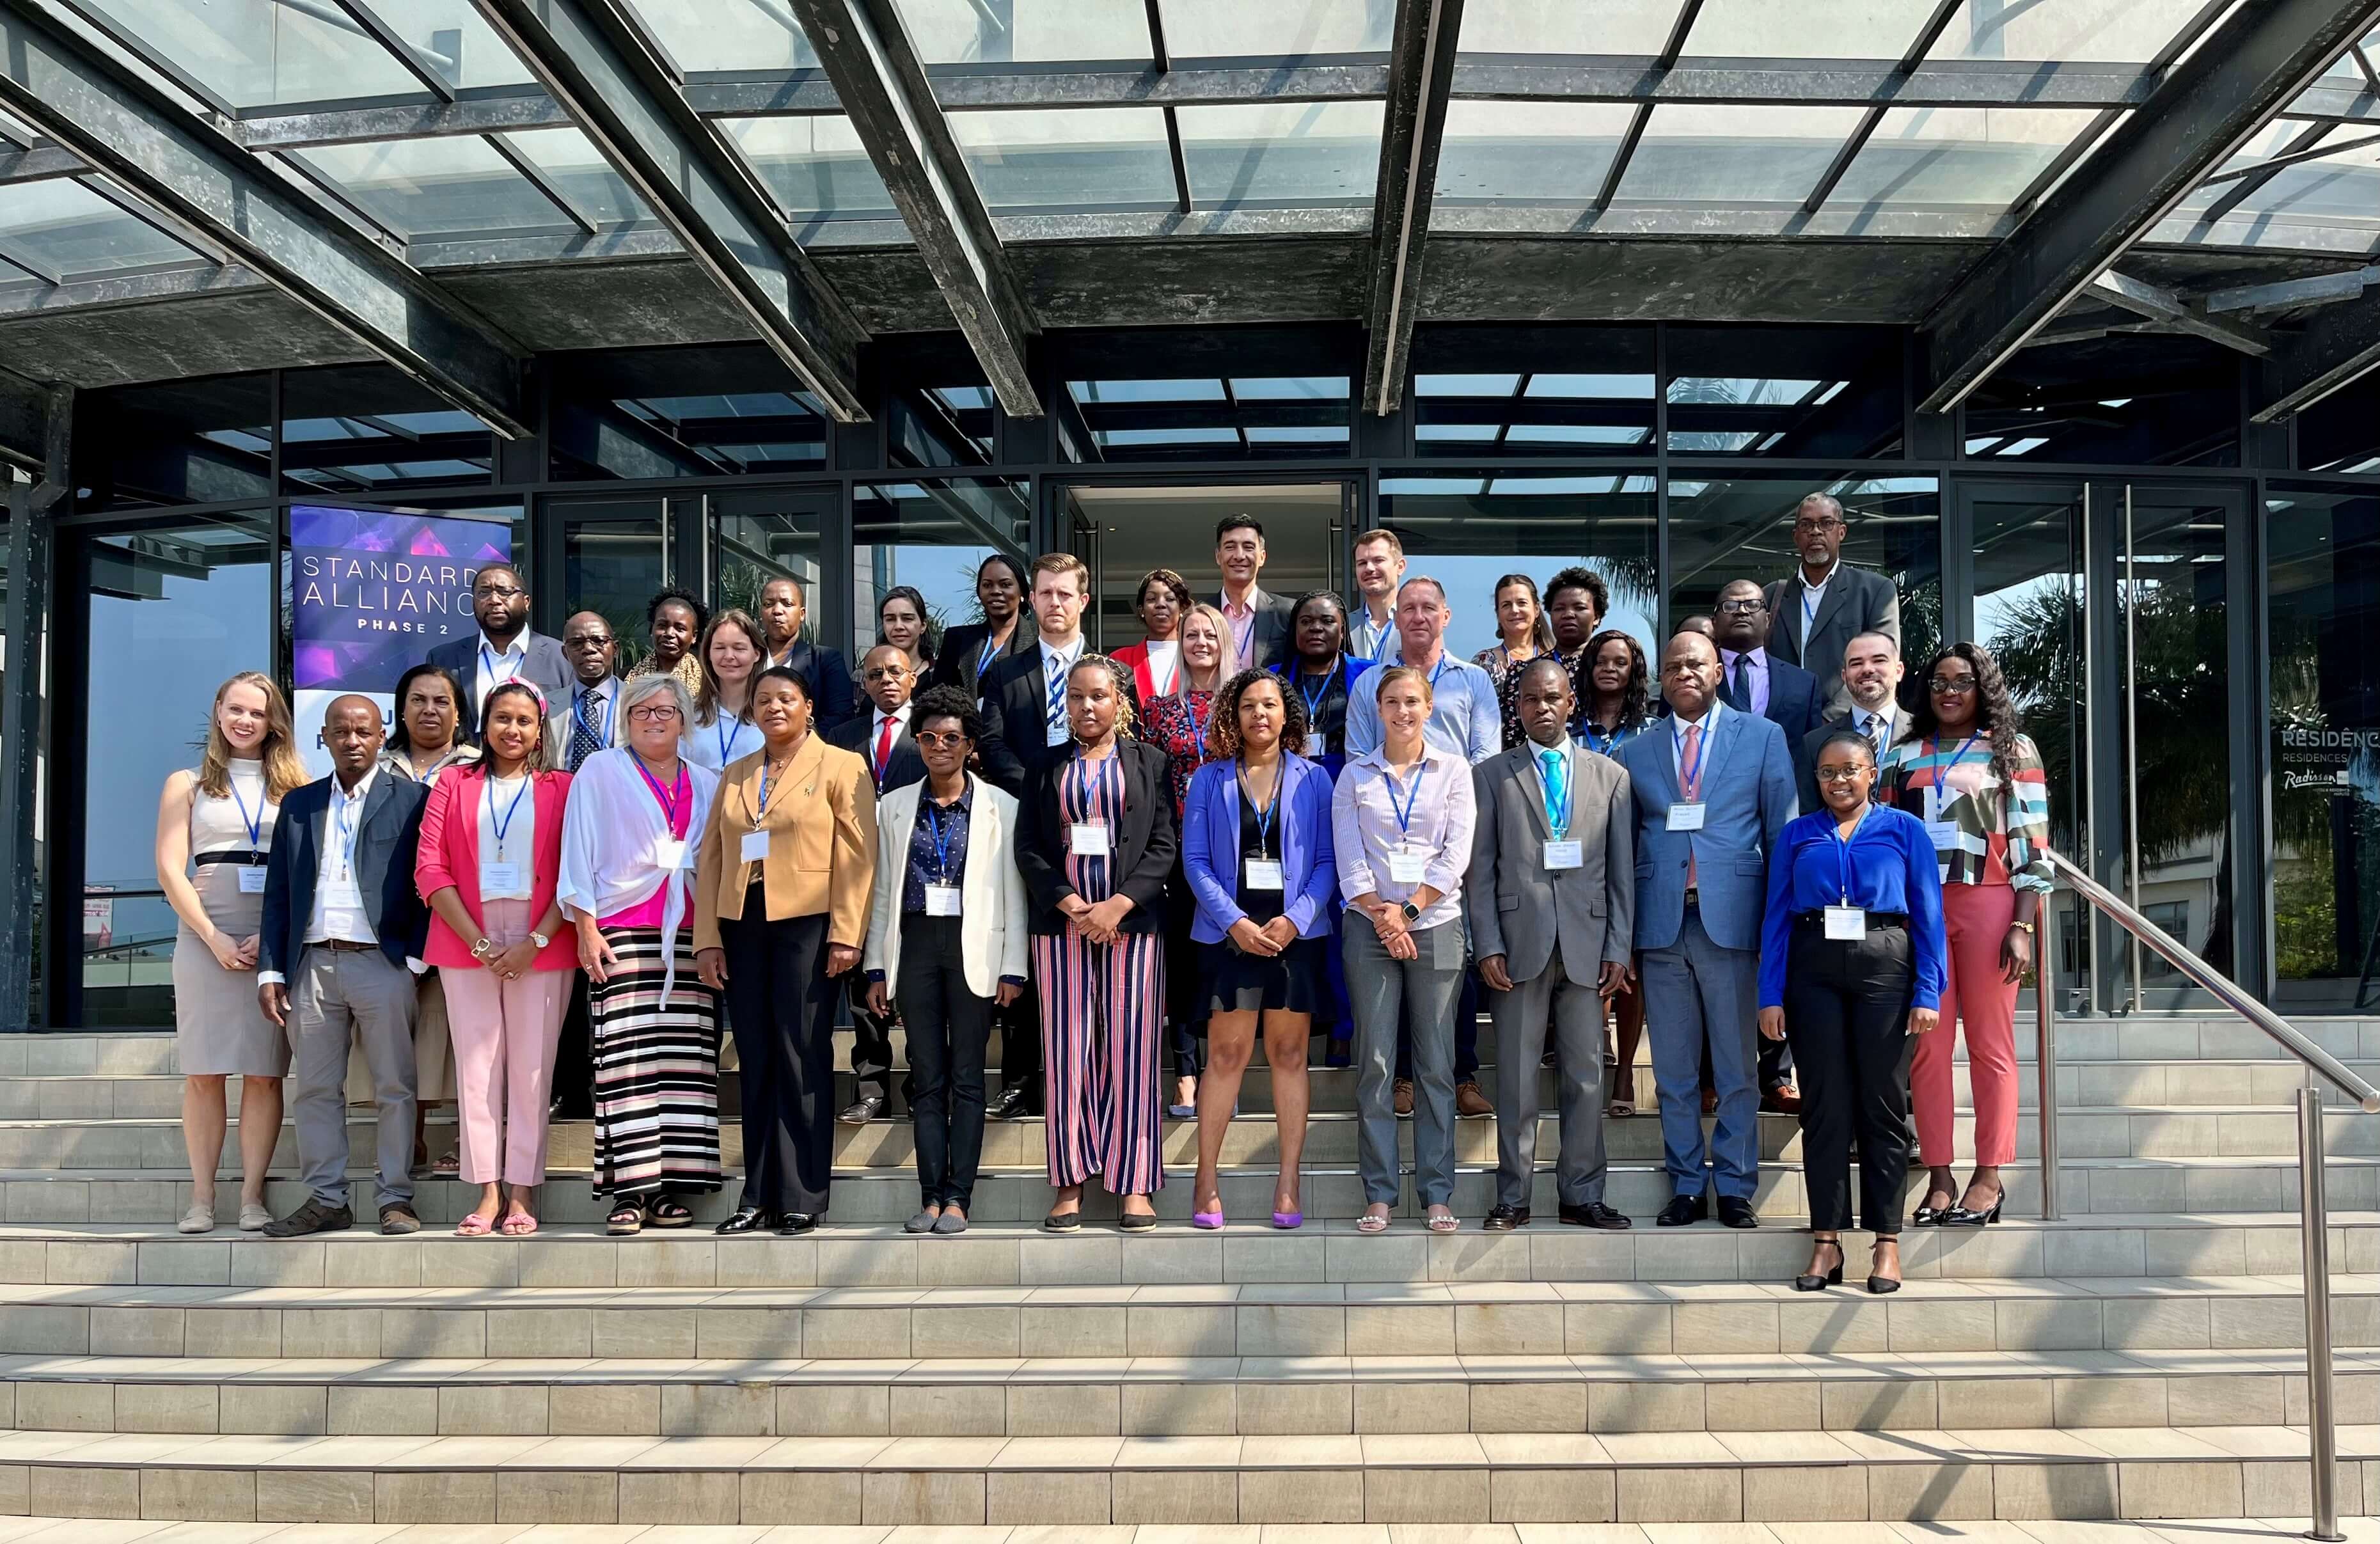 Standards Alliance: Phase 2 Mozambique group picture